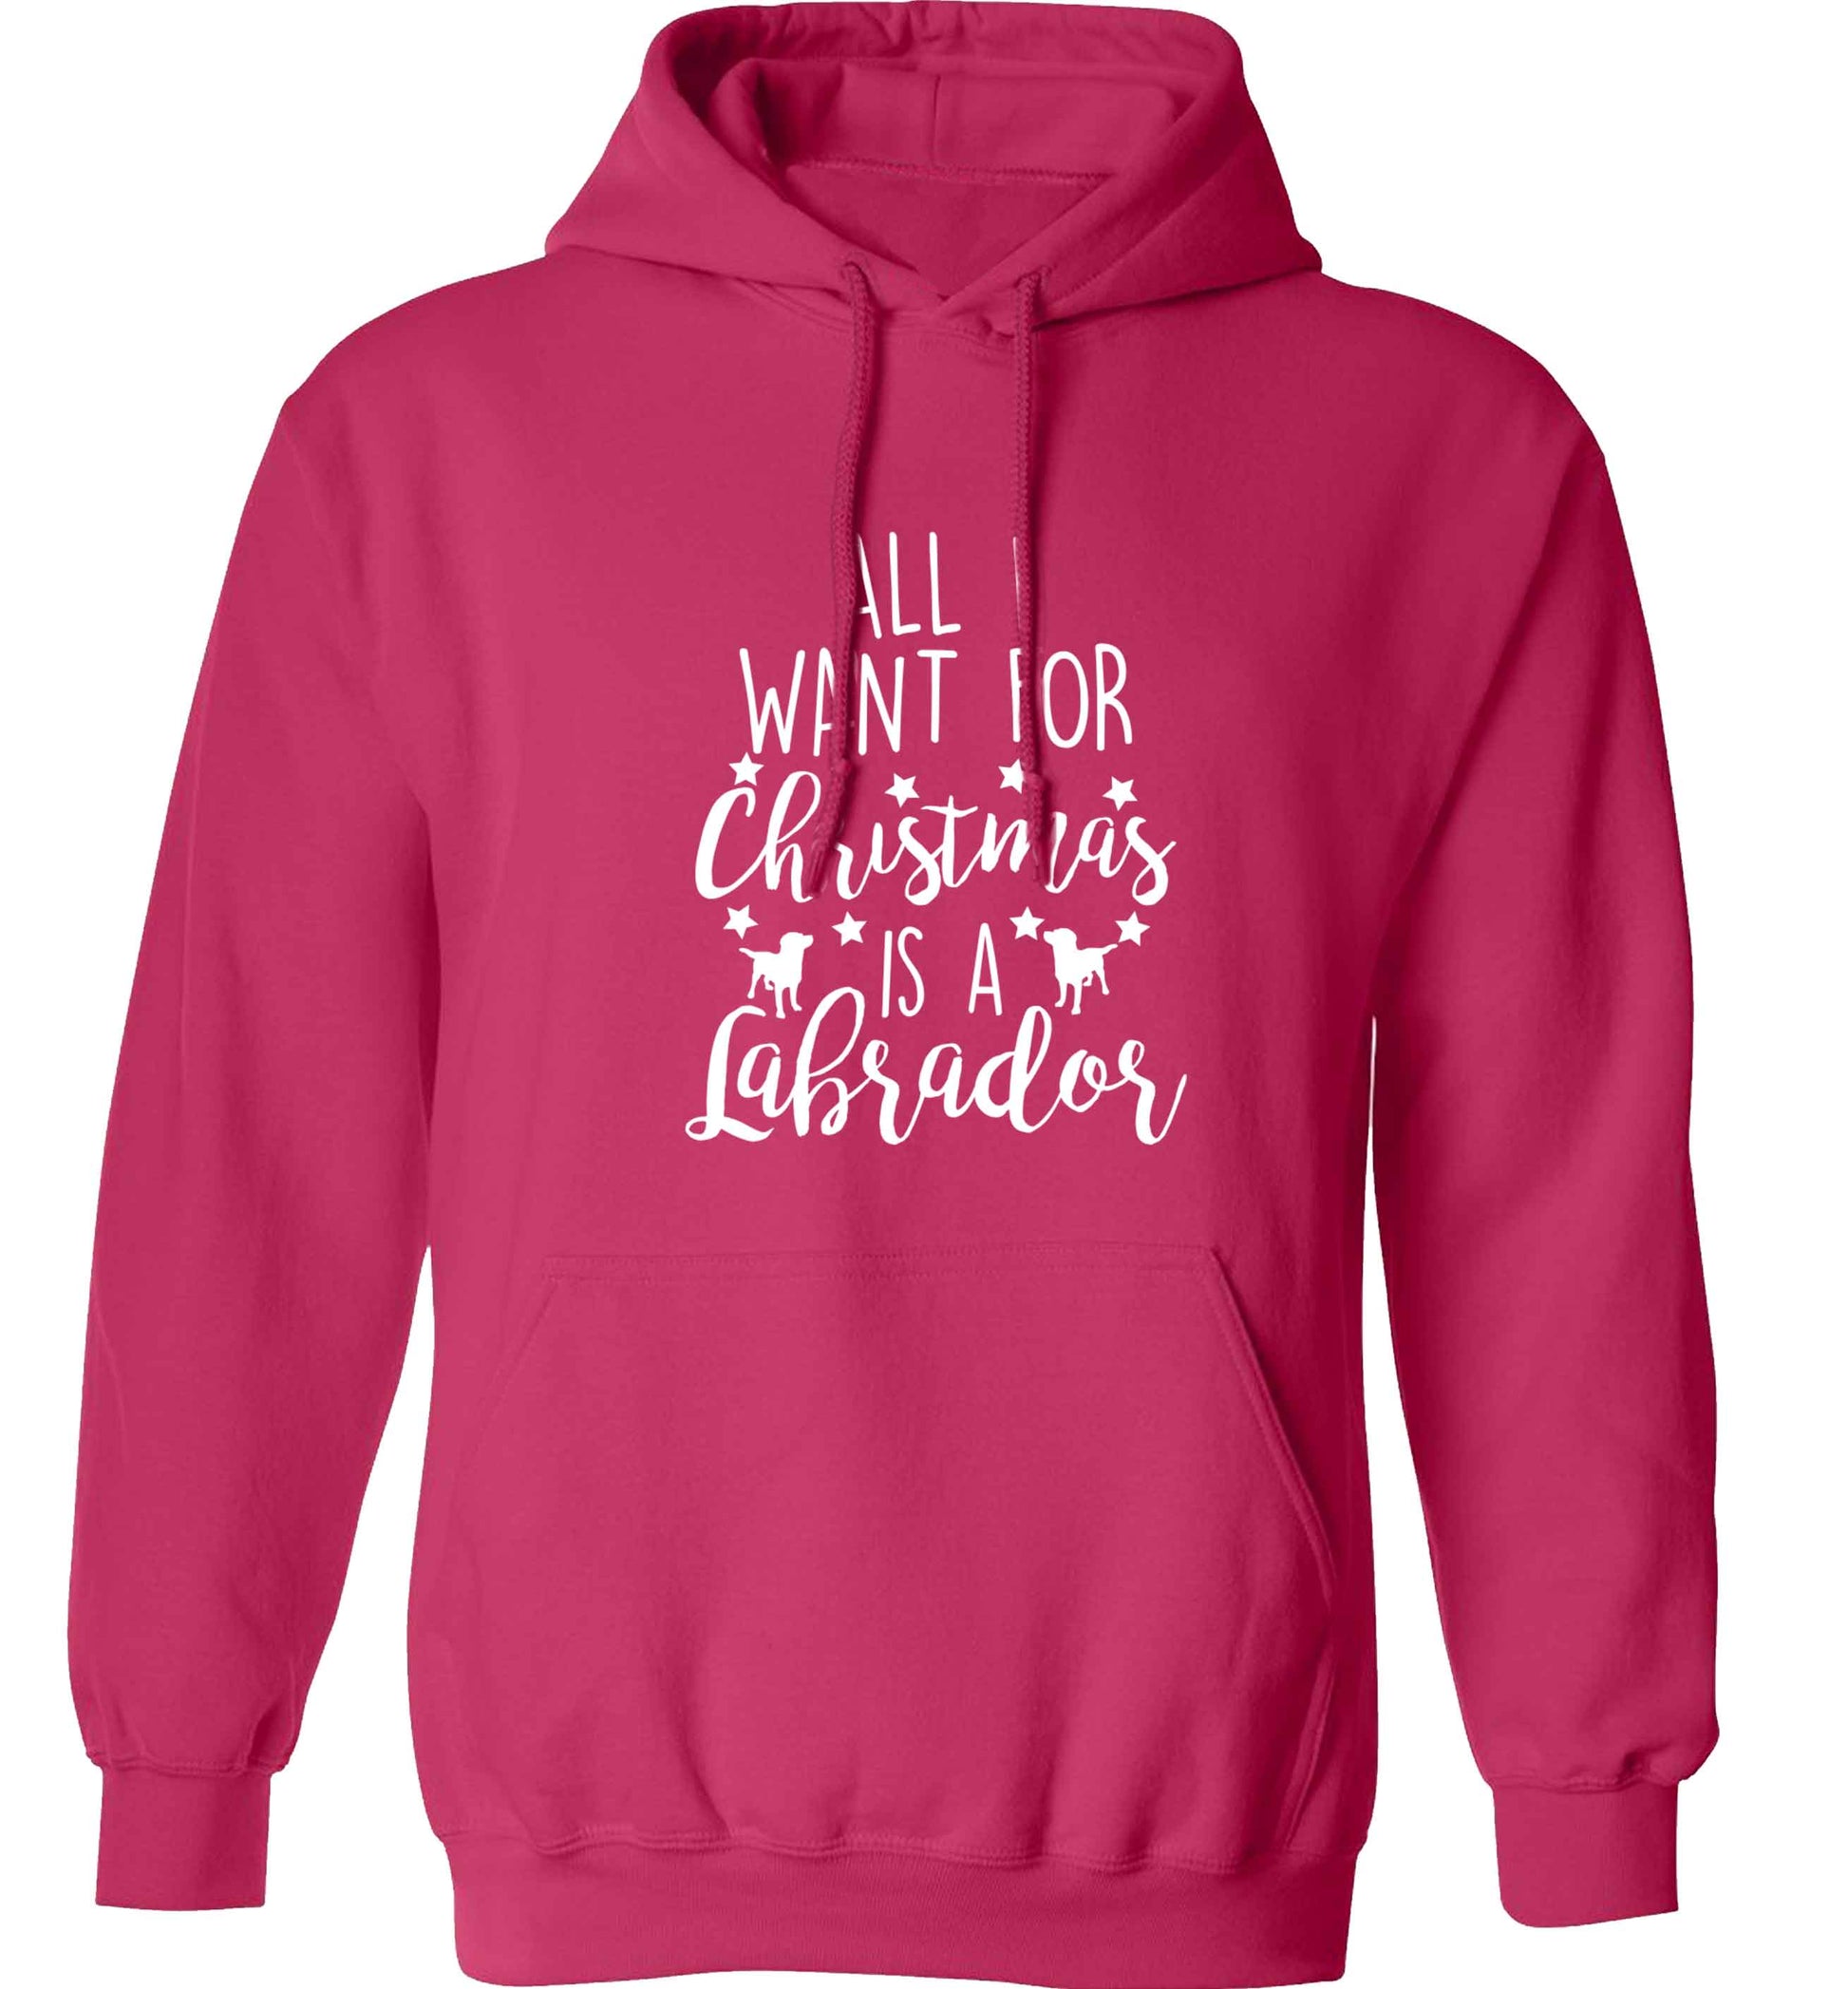 All I want for Christmas is a labrador adults unisex pink hoodie 2XL